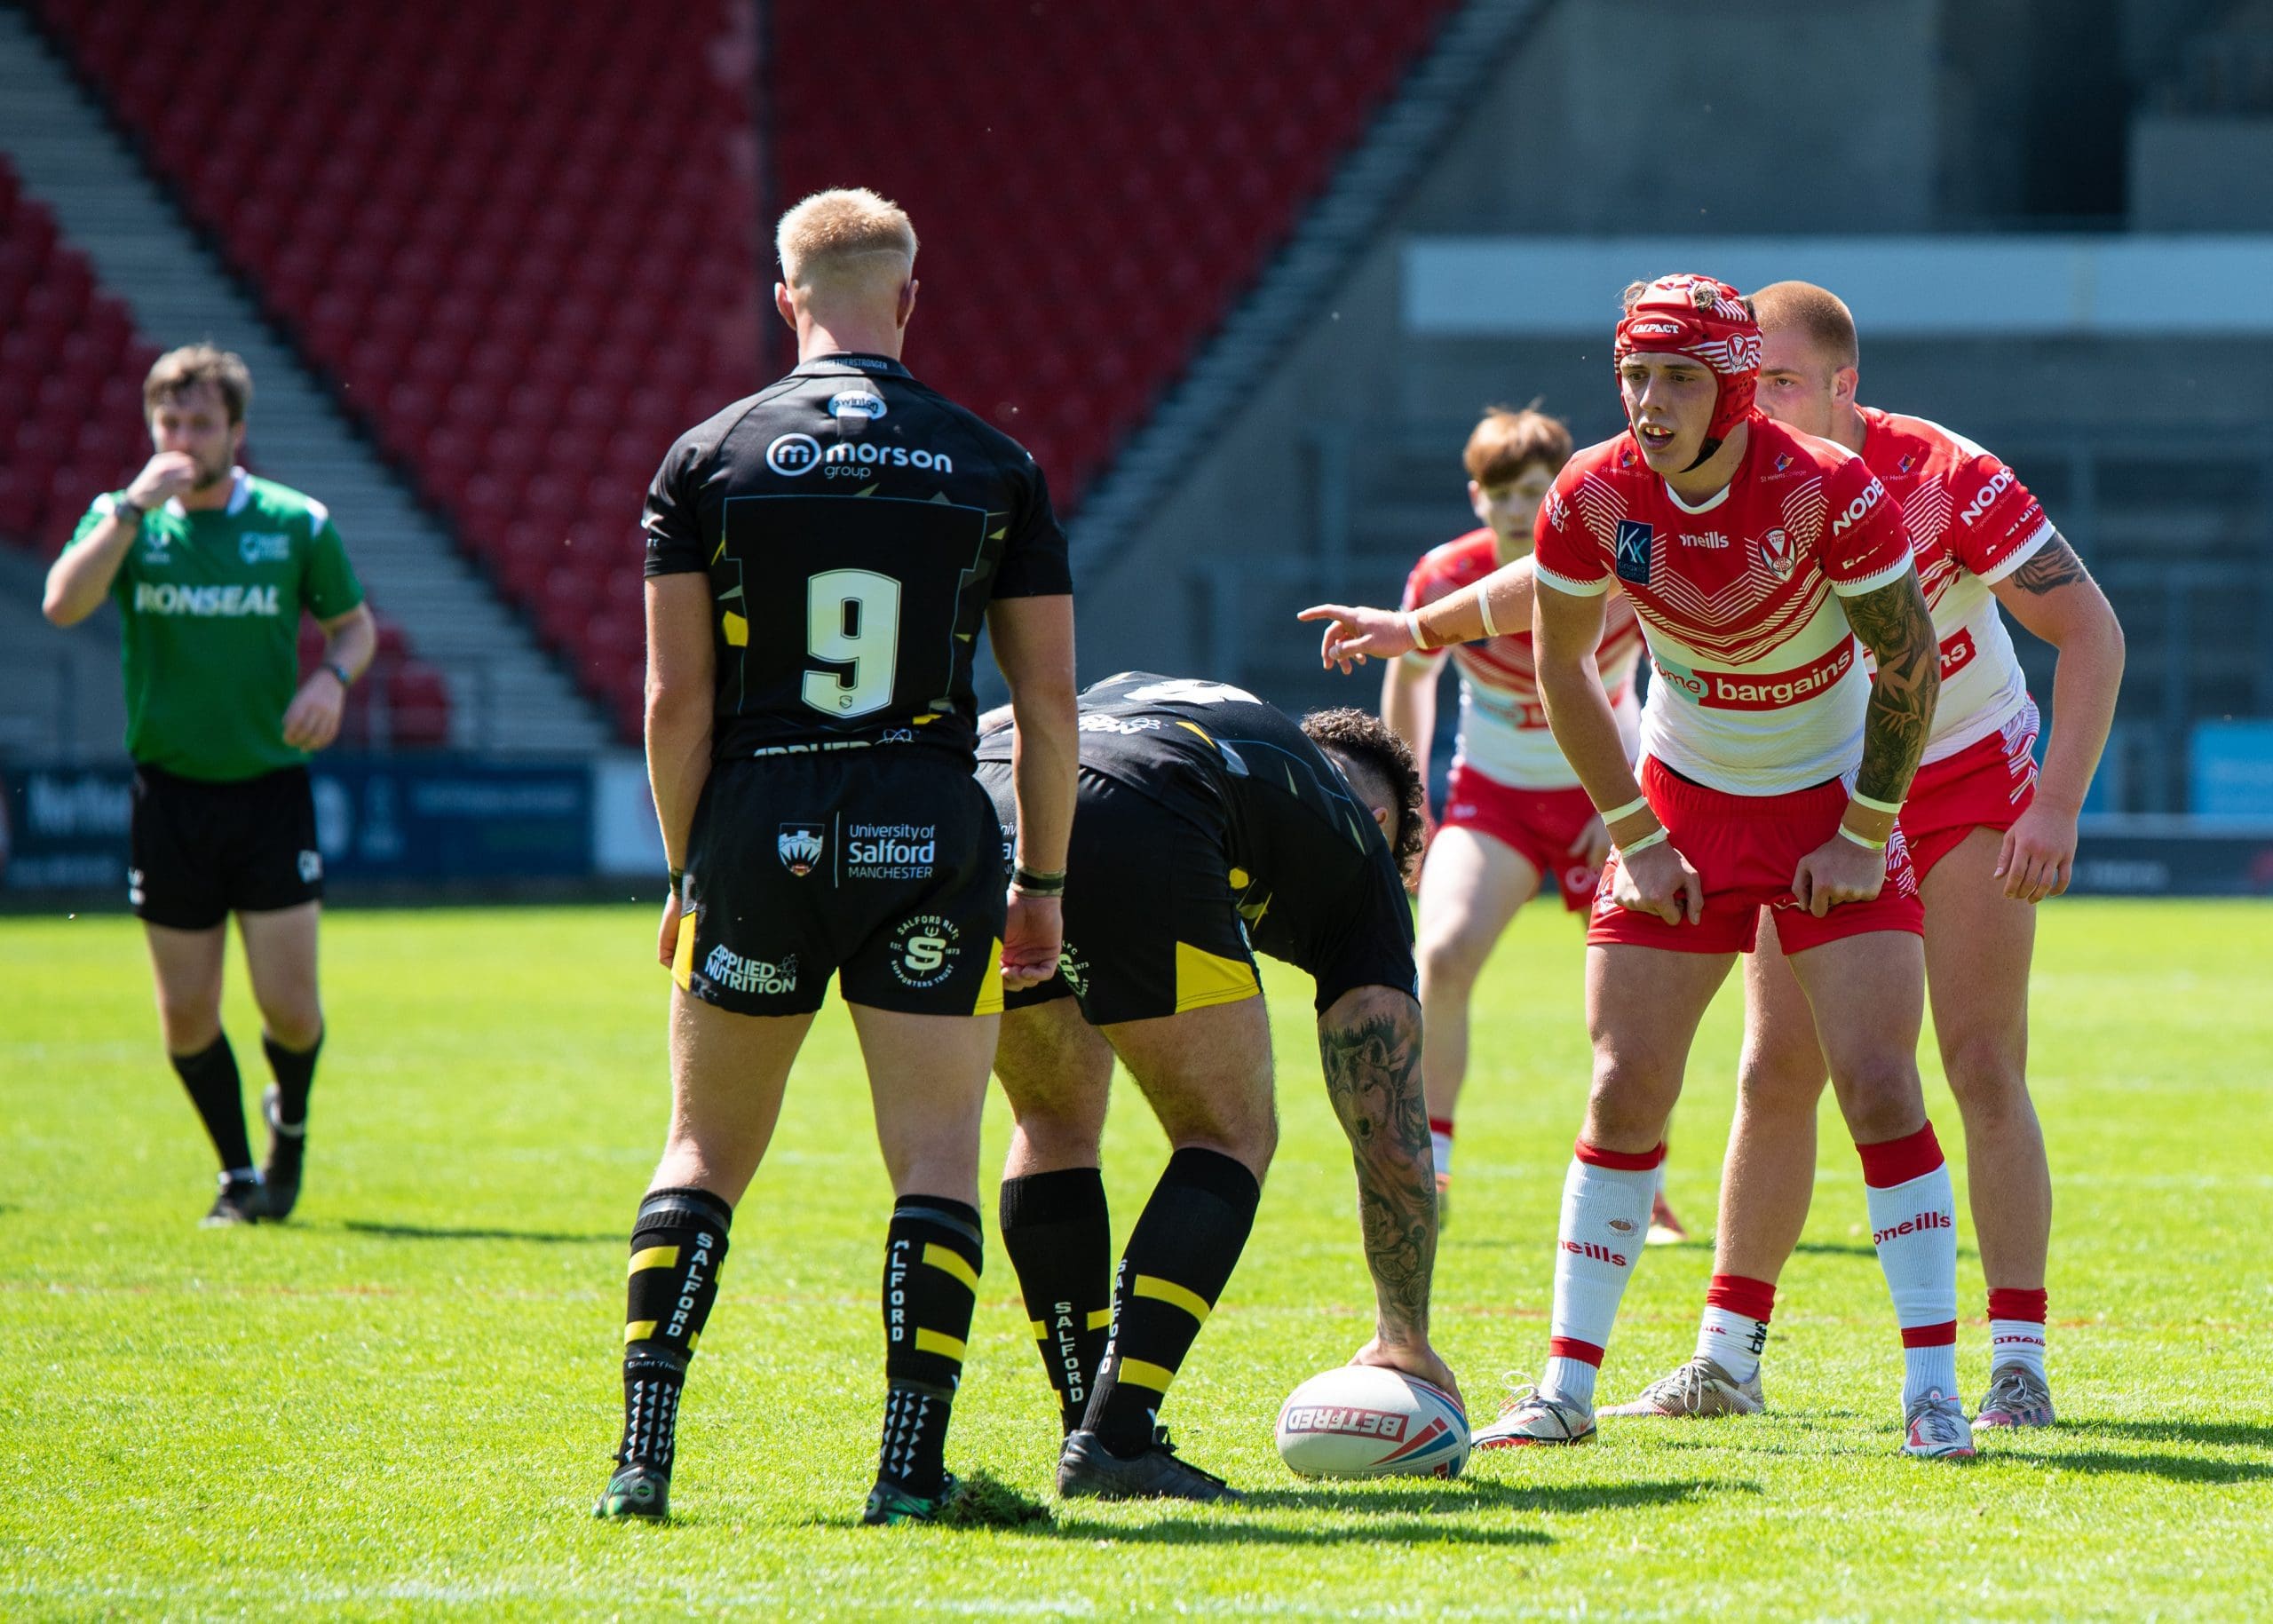 SALFORD TO HOST RESERVE TEAM TRIAL GAME ON NOVEMBER 13TH - Salford